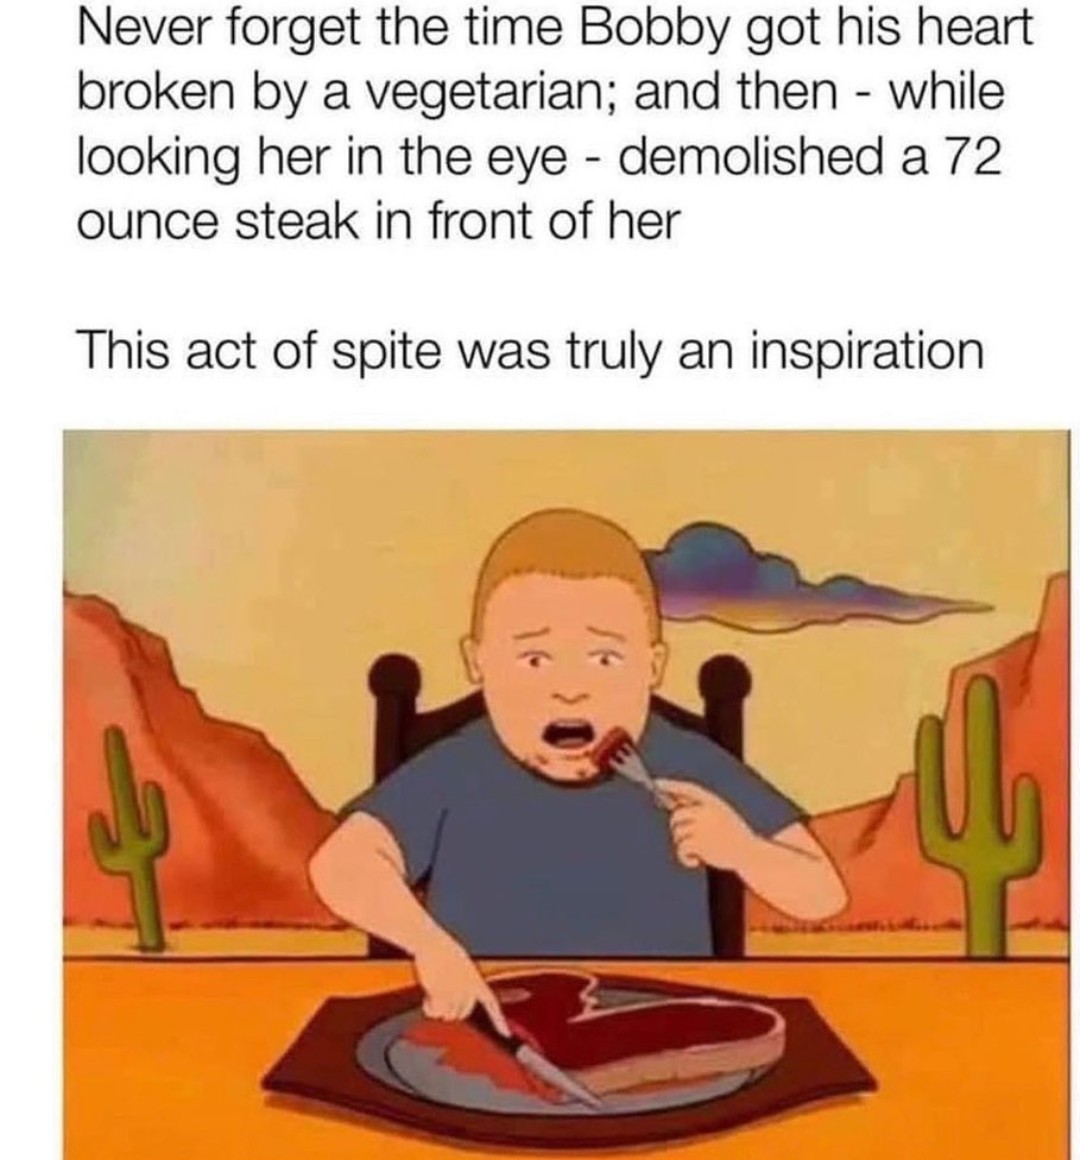 cool random pics and memes - bobby hill steak meme - Never forget the time Bobby got his heart broken by a vegetarian; and then while looking her in the eye demolished a 72 ounce steak in front of her This act of spite was truly an inspiration